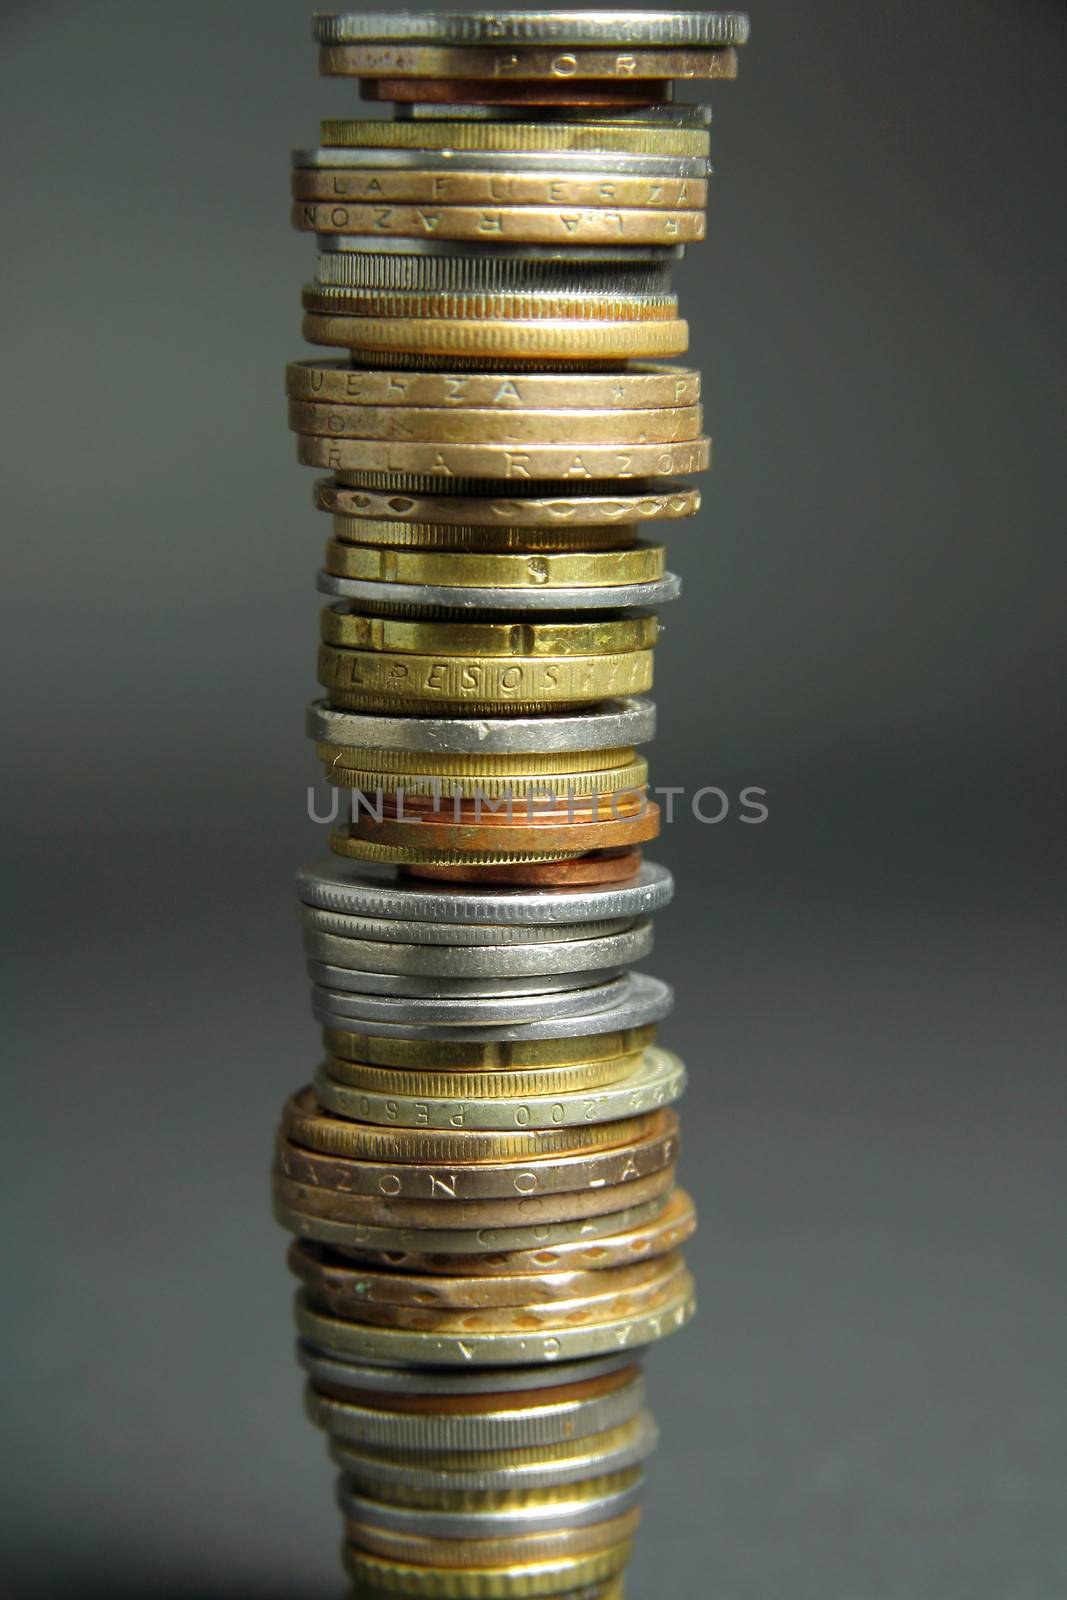 Tall stack of coins from different countries.